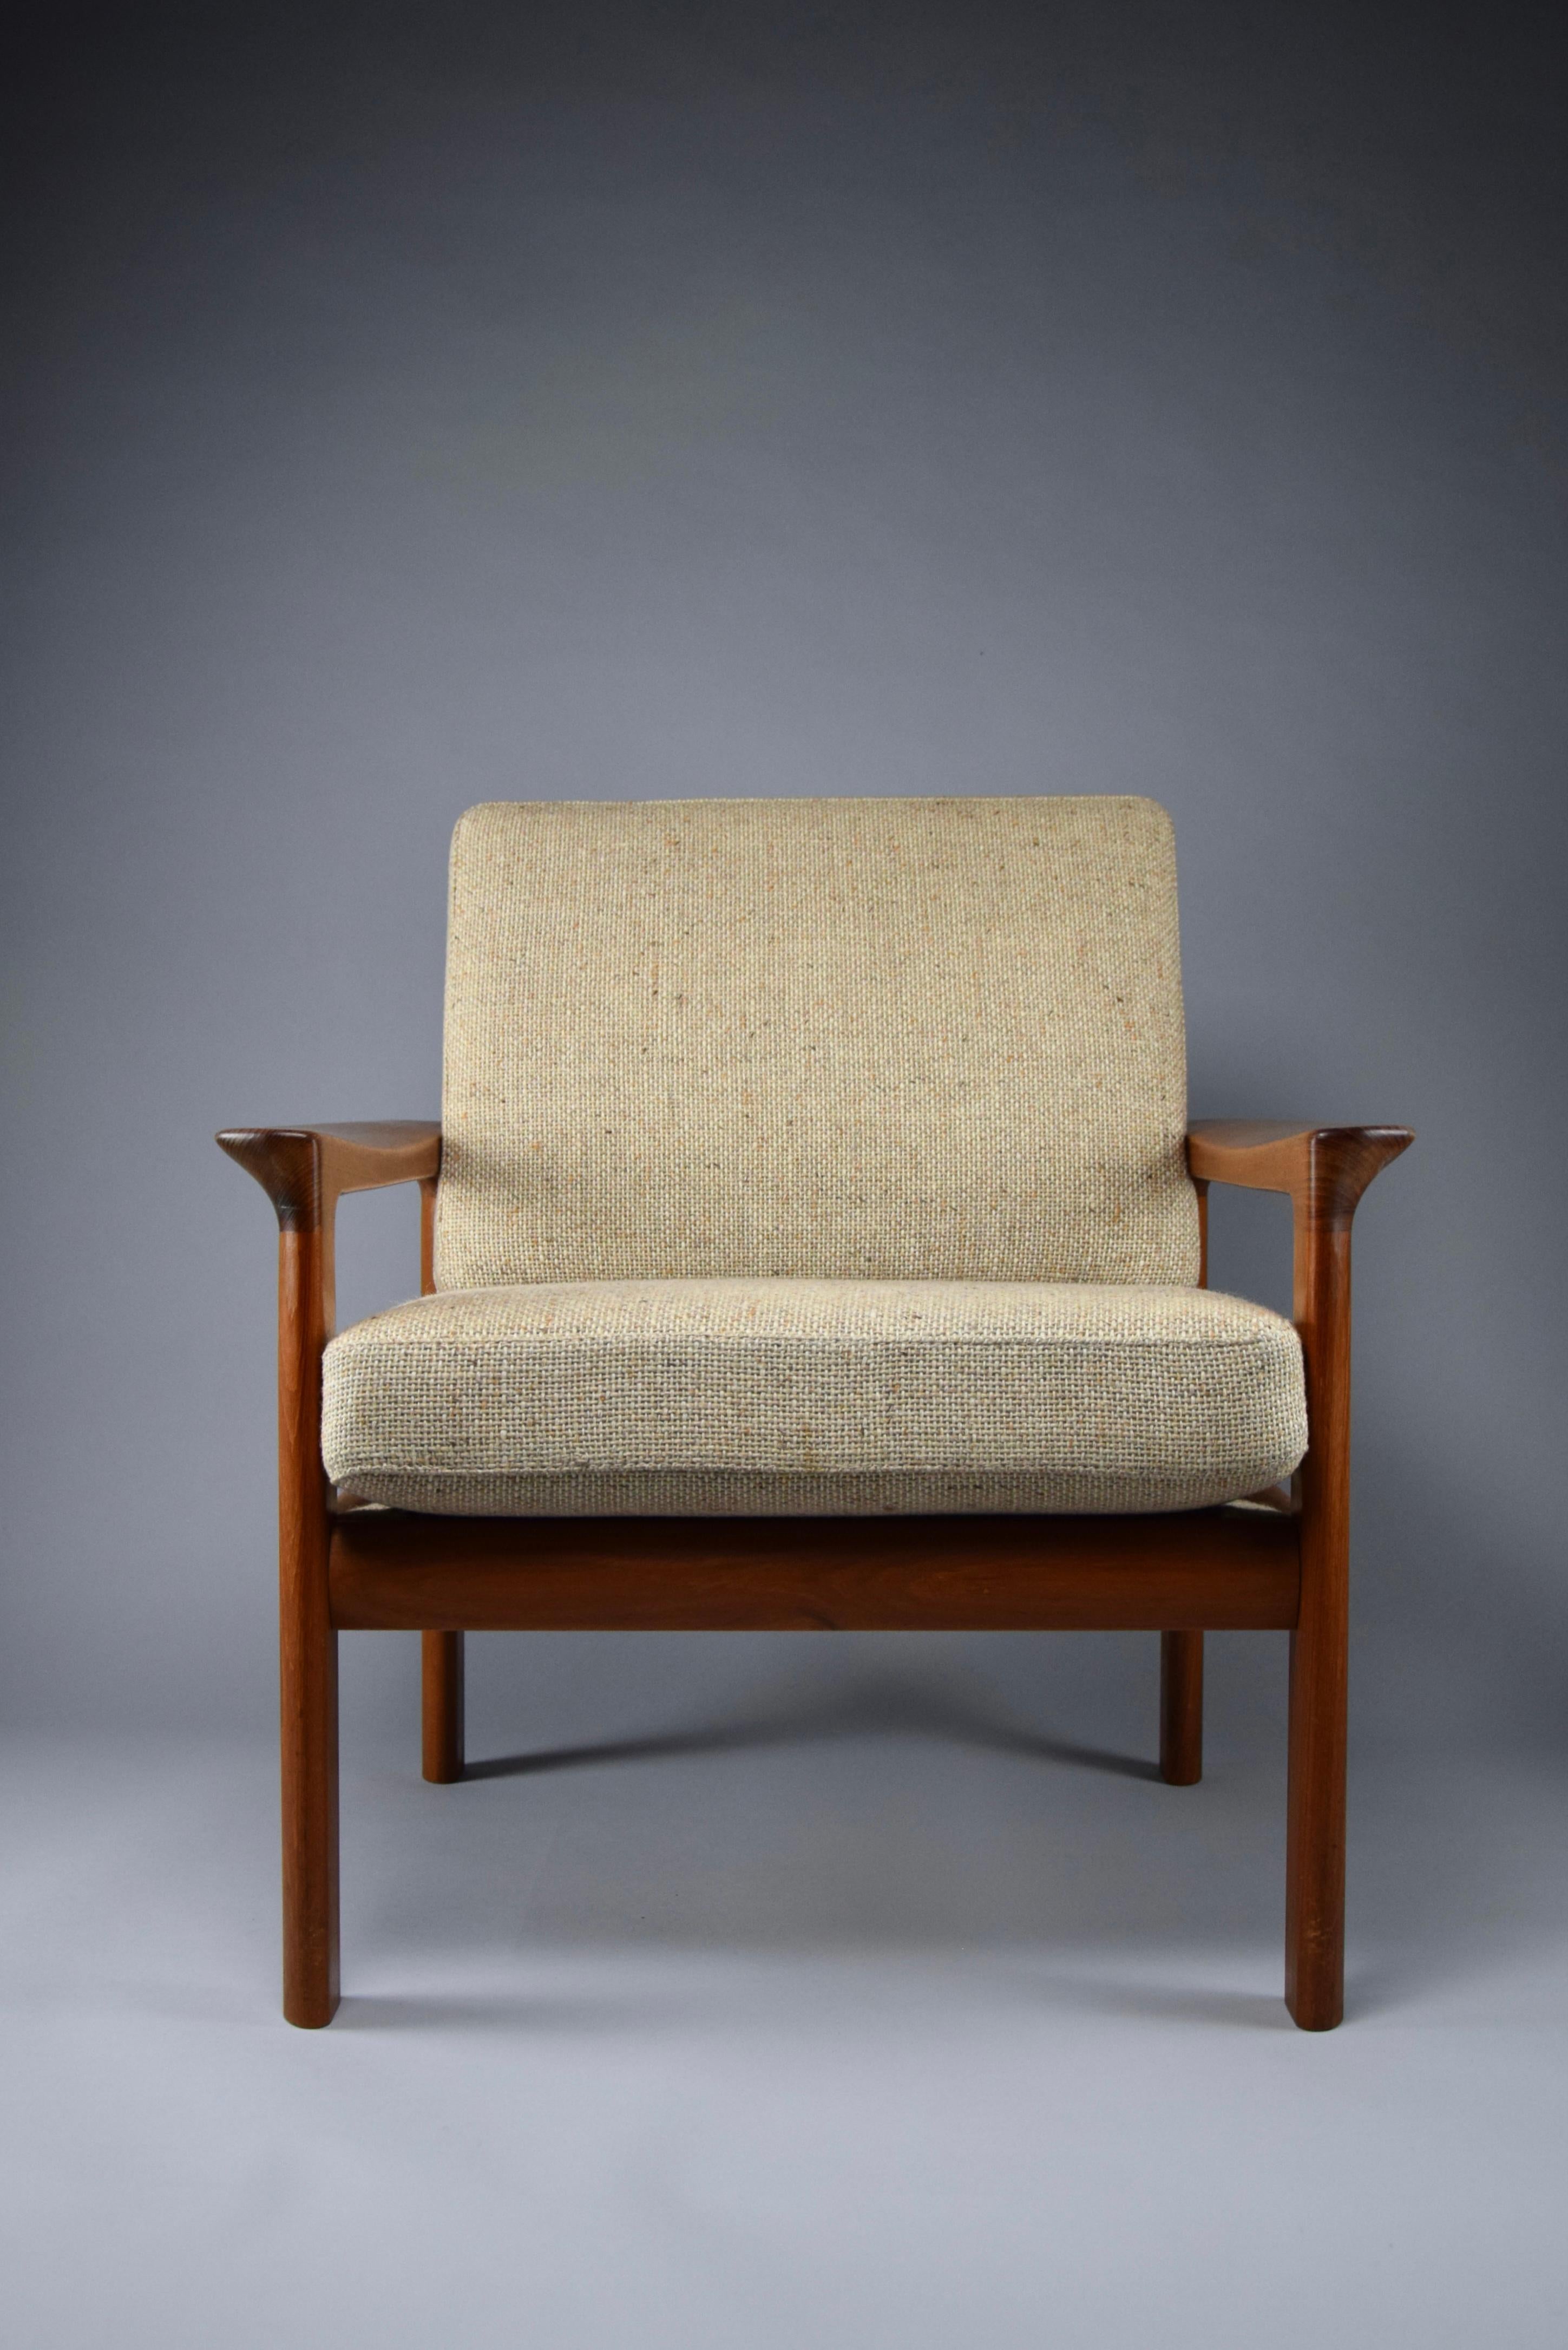 Stylish Danish Solid Teak Mid Century Modern Lounge Chair In Good Condition For Sale In Weesp, NL